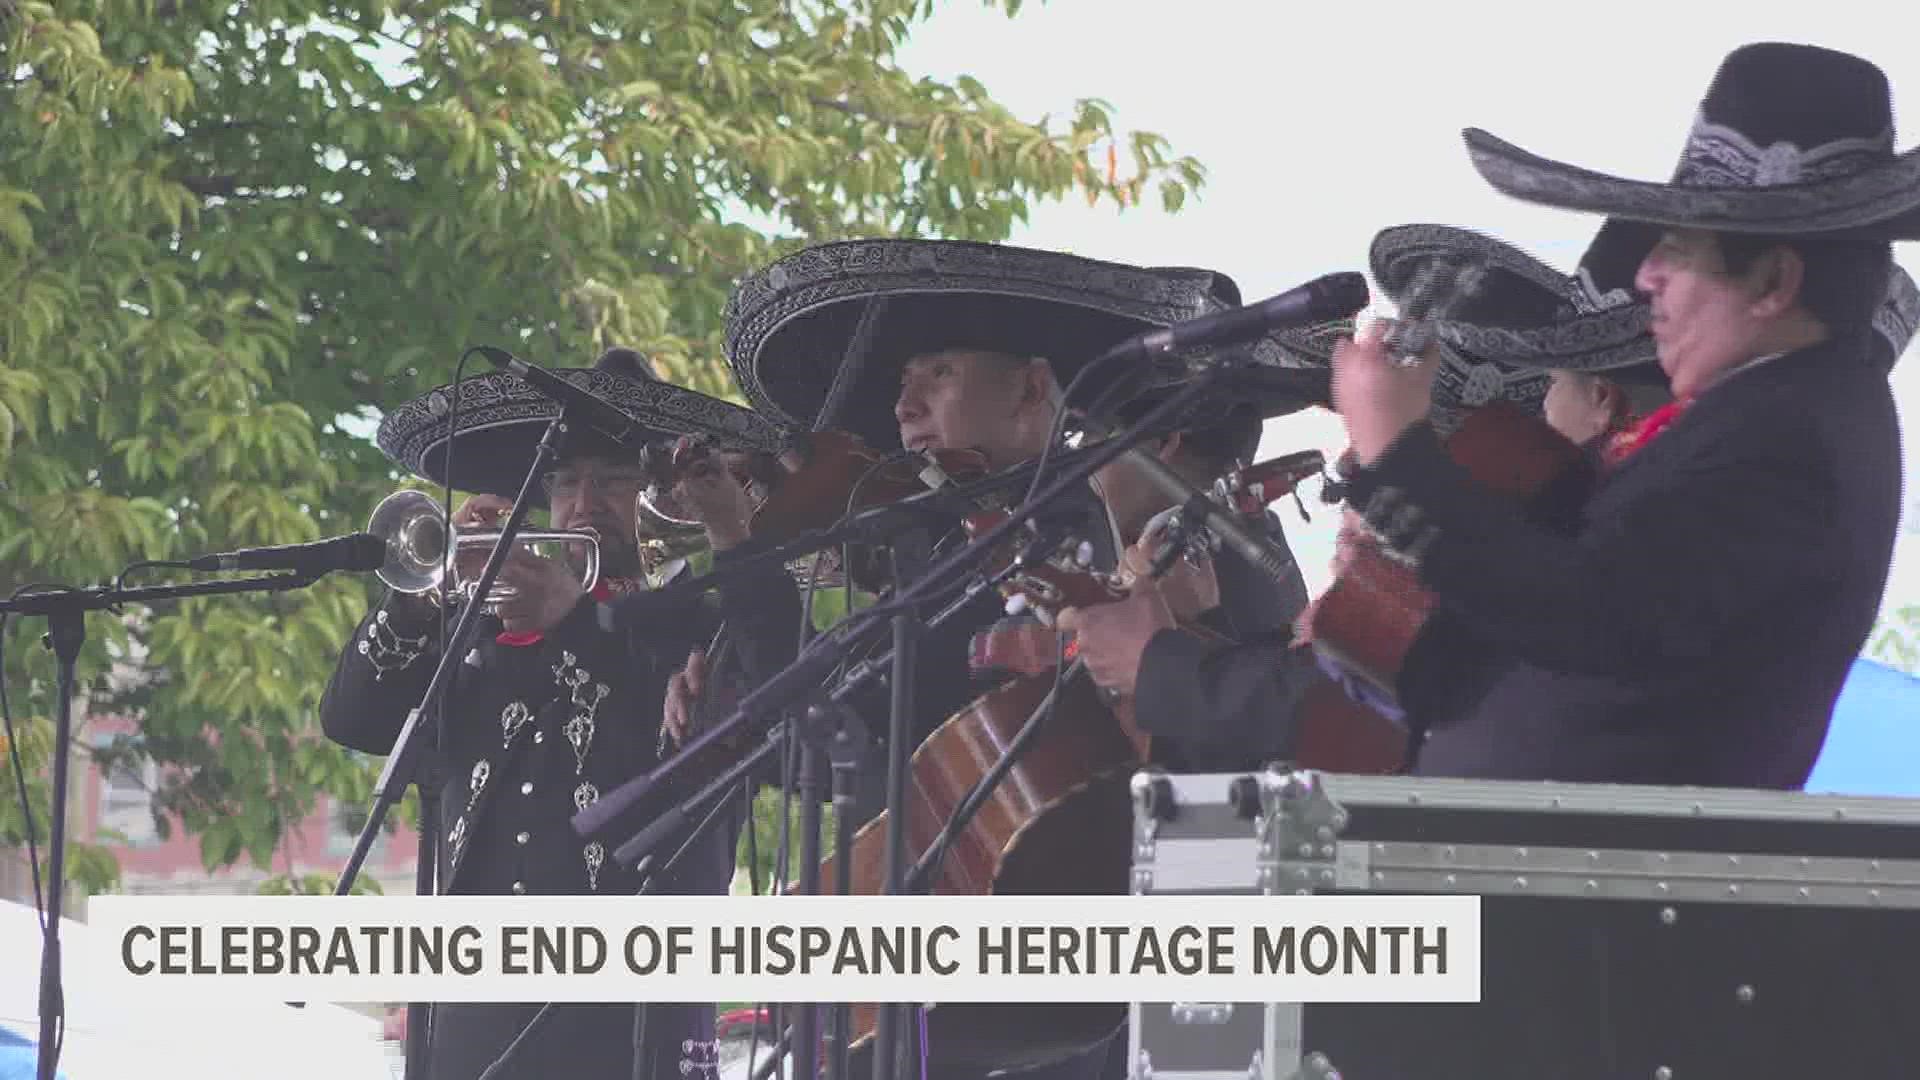 Organizers wanted to bring the community together to celebrate the history of the Hispanic community and all of the contributions they have made over the years.